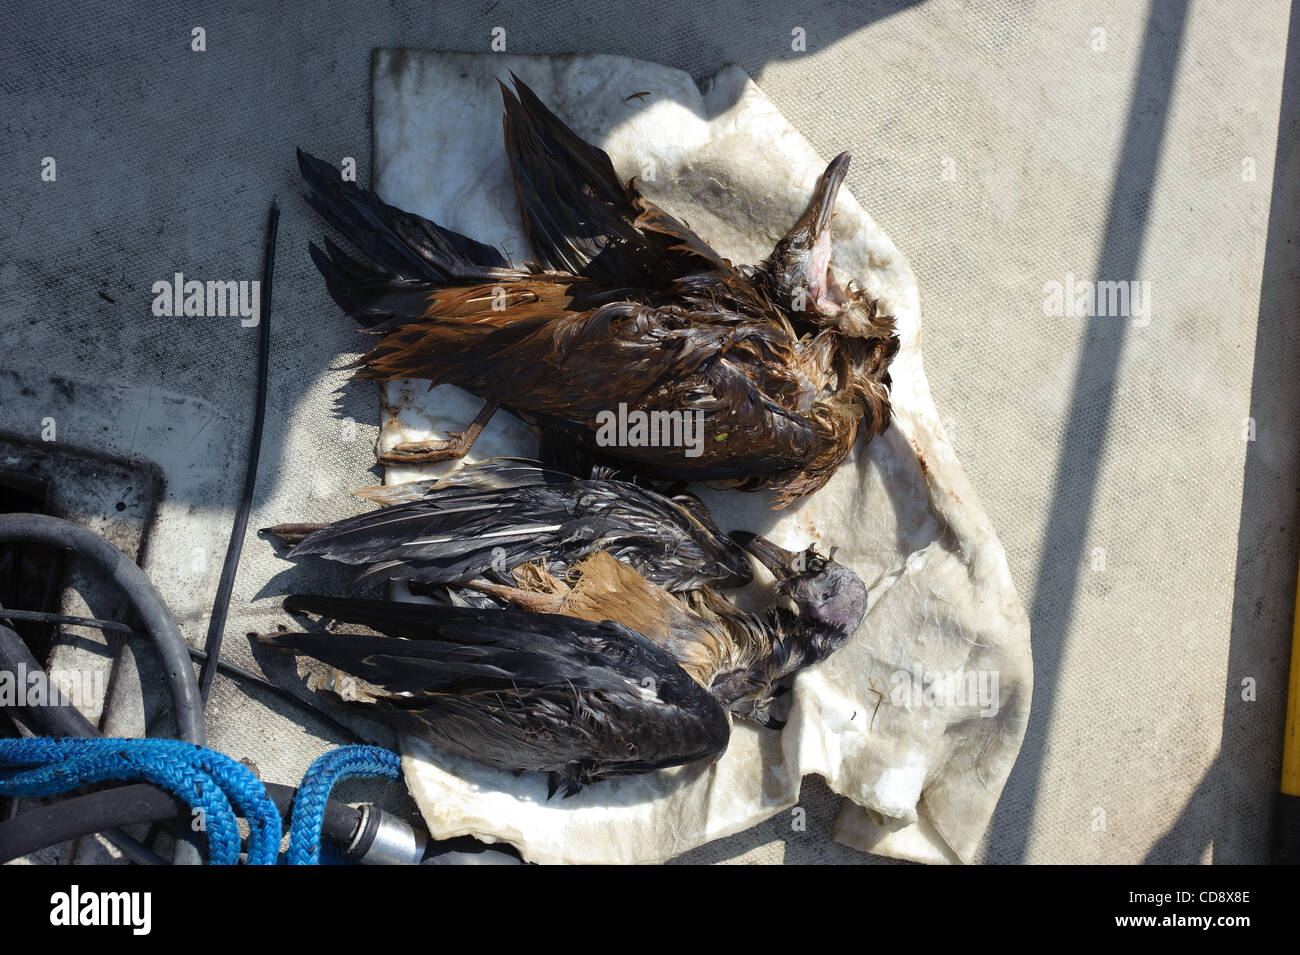 Pair of dead juvenile laughing gulls found floating in Barataria pass just east of Grand isle , louisiana. These birds were turne over to Louisana wildlife and fisheries. Stock Photo